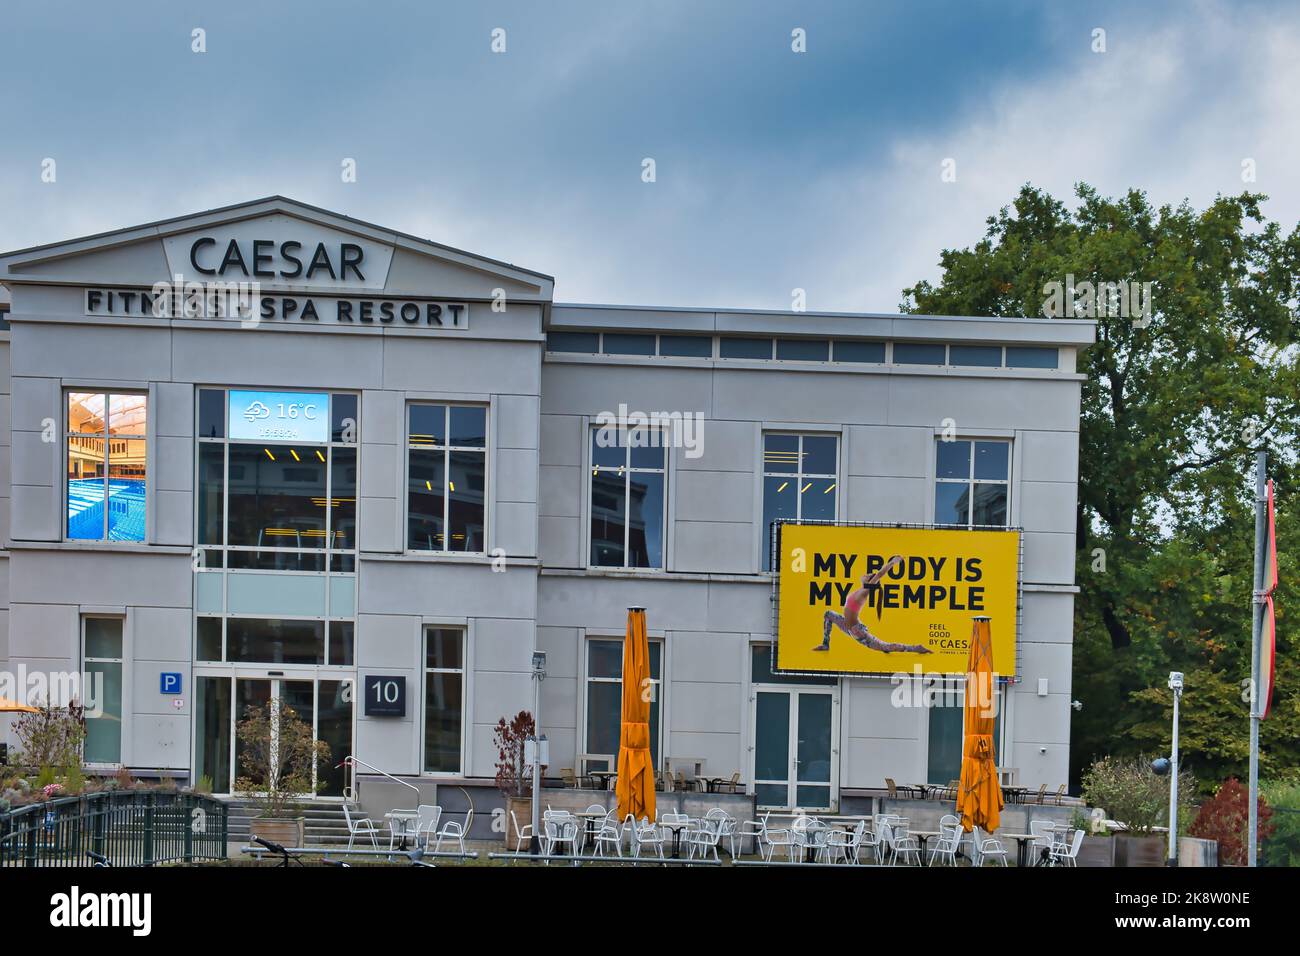 The Caesar Fitness and Spa Resort in The Hague, Netherlands, with text 'My body is my temple' Stock Photo